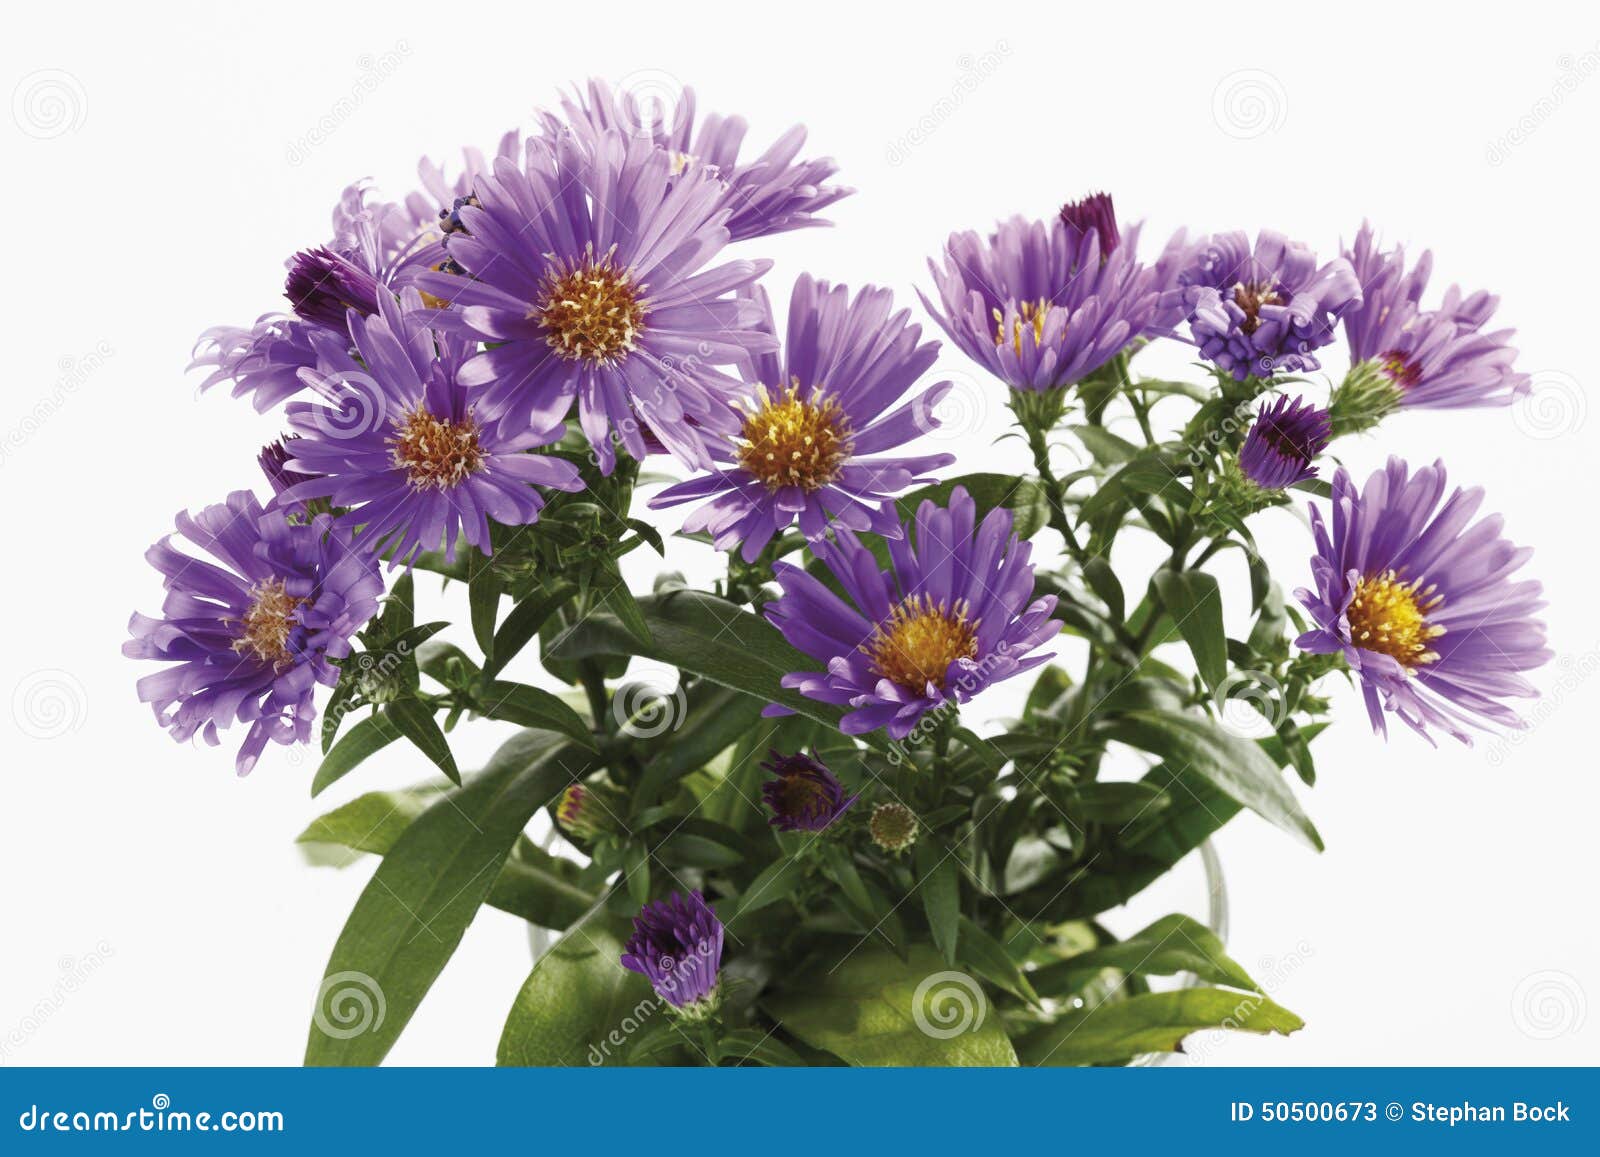 Bunch of Purple Autumn Asters Stock Image - Image of bouquet, pistil ...